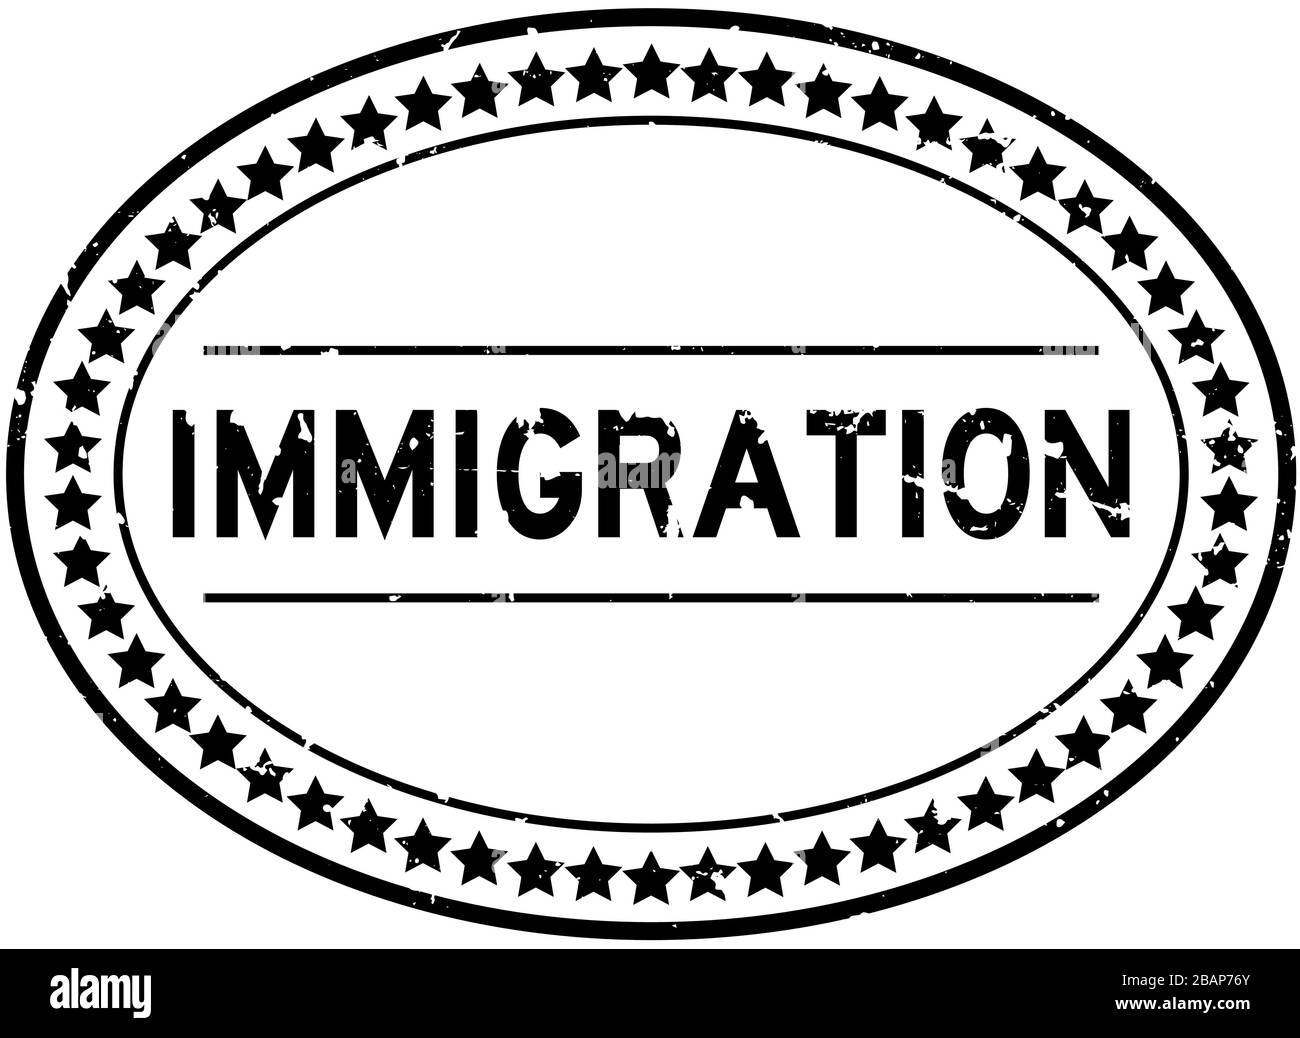 Grunge black immigration word oval rubber seal stamp on white background Stock Vector